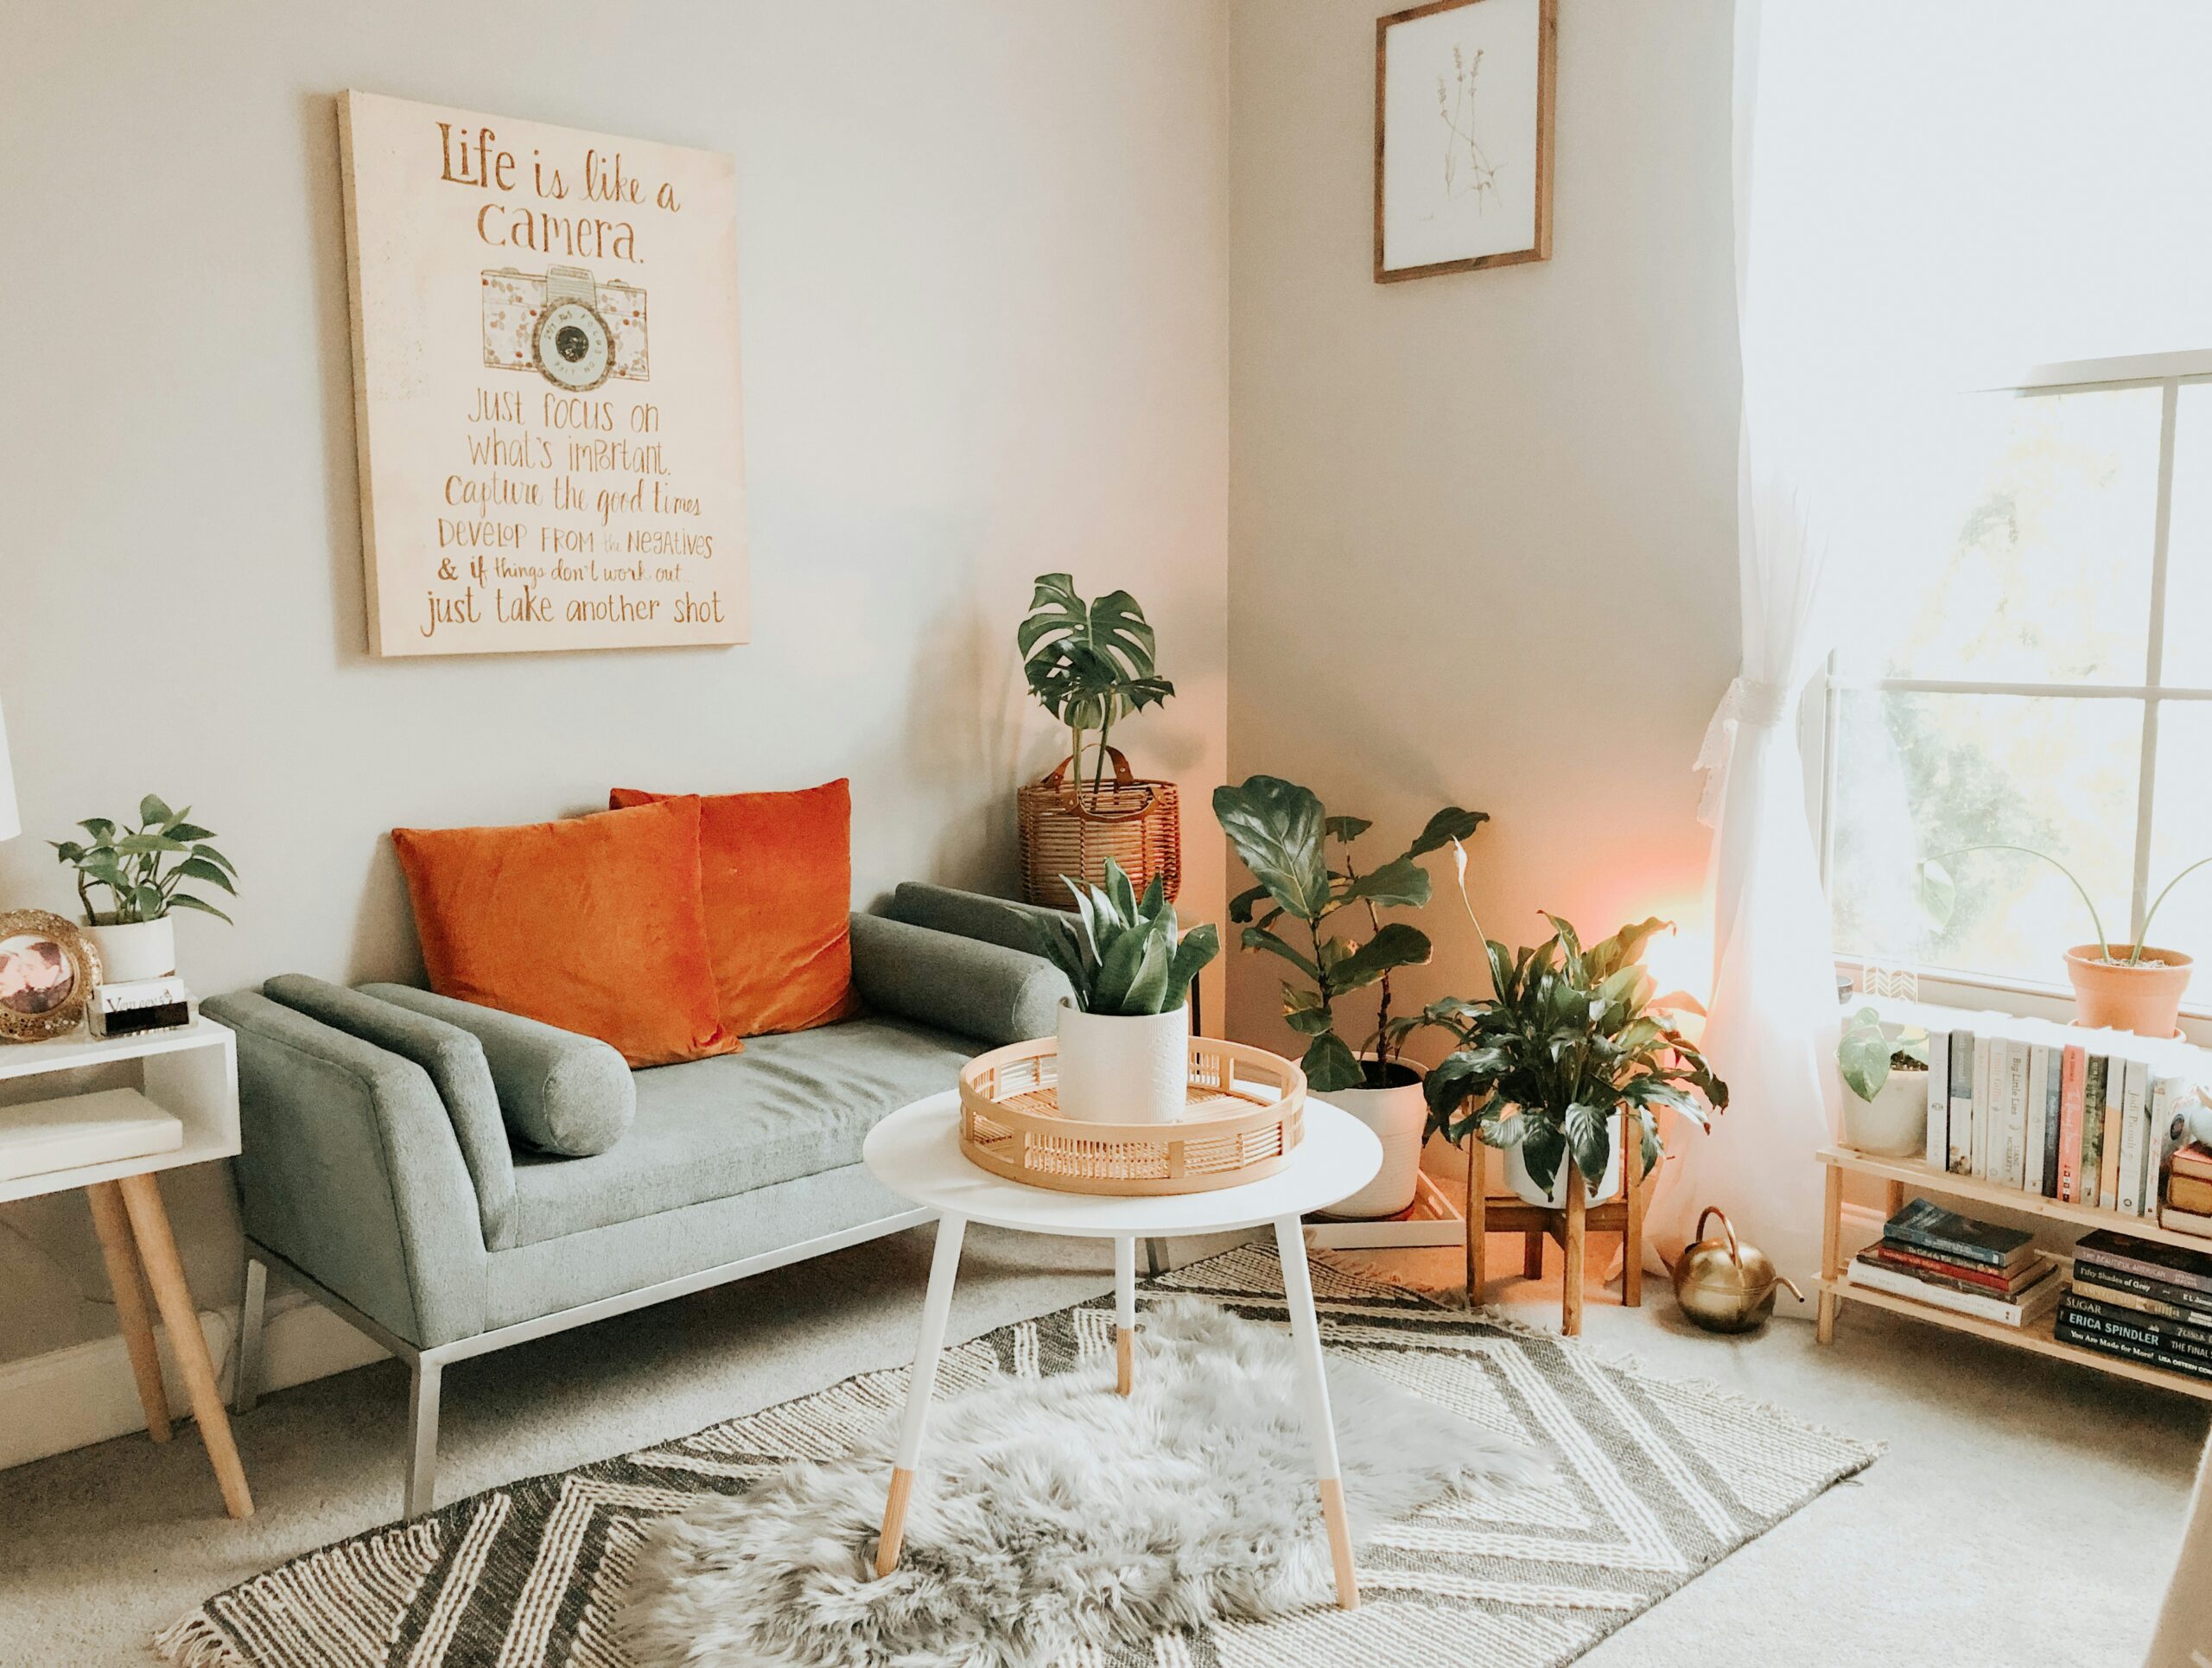 Add home decor pieces to create a Hygge aesthetic. Pictured: A cozy living room with color